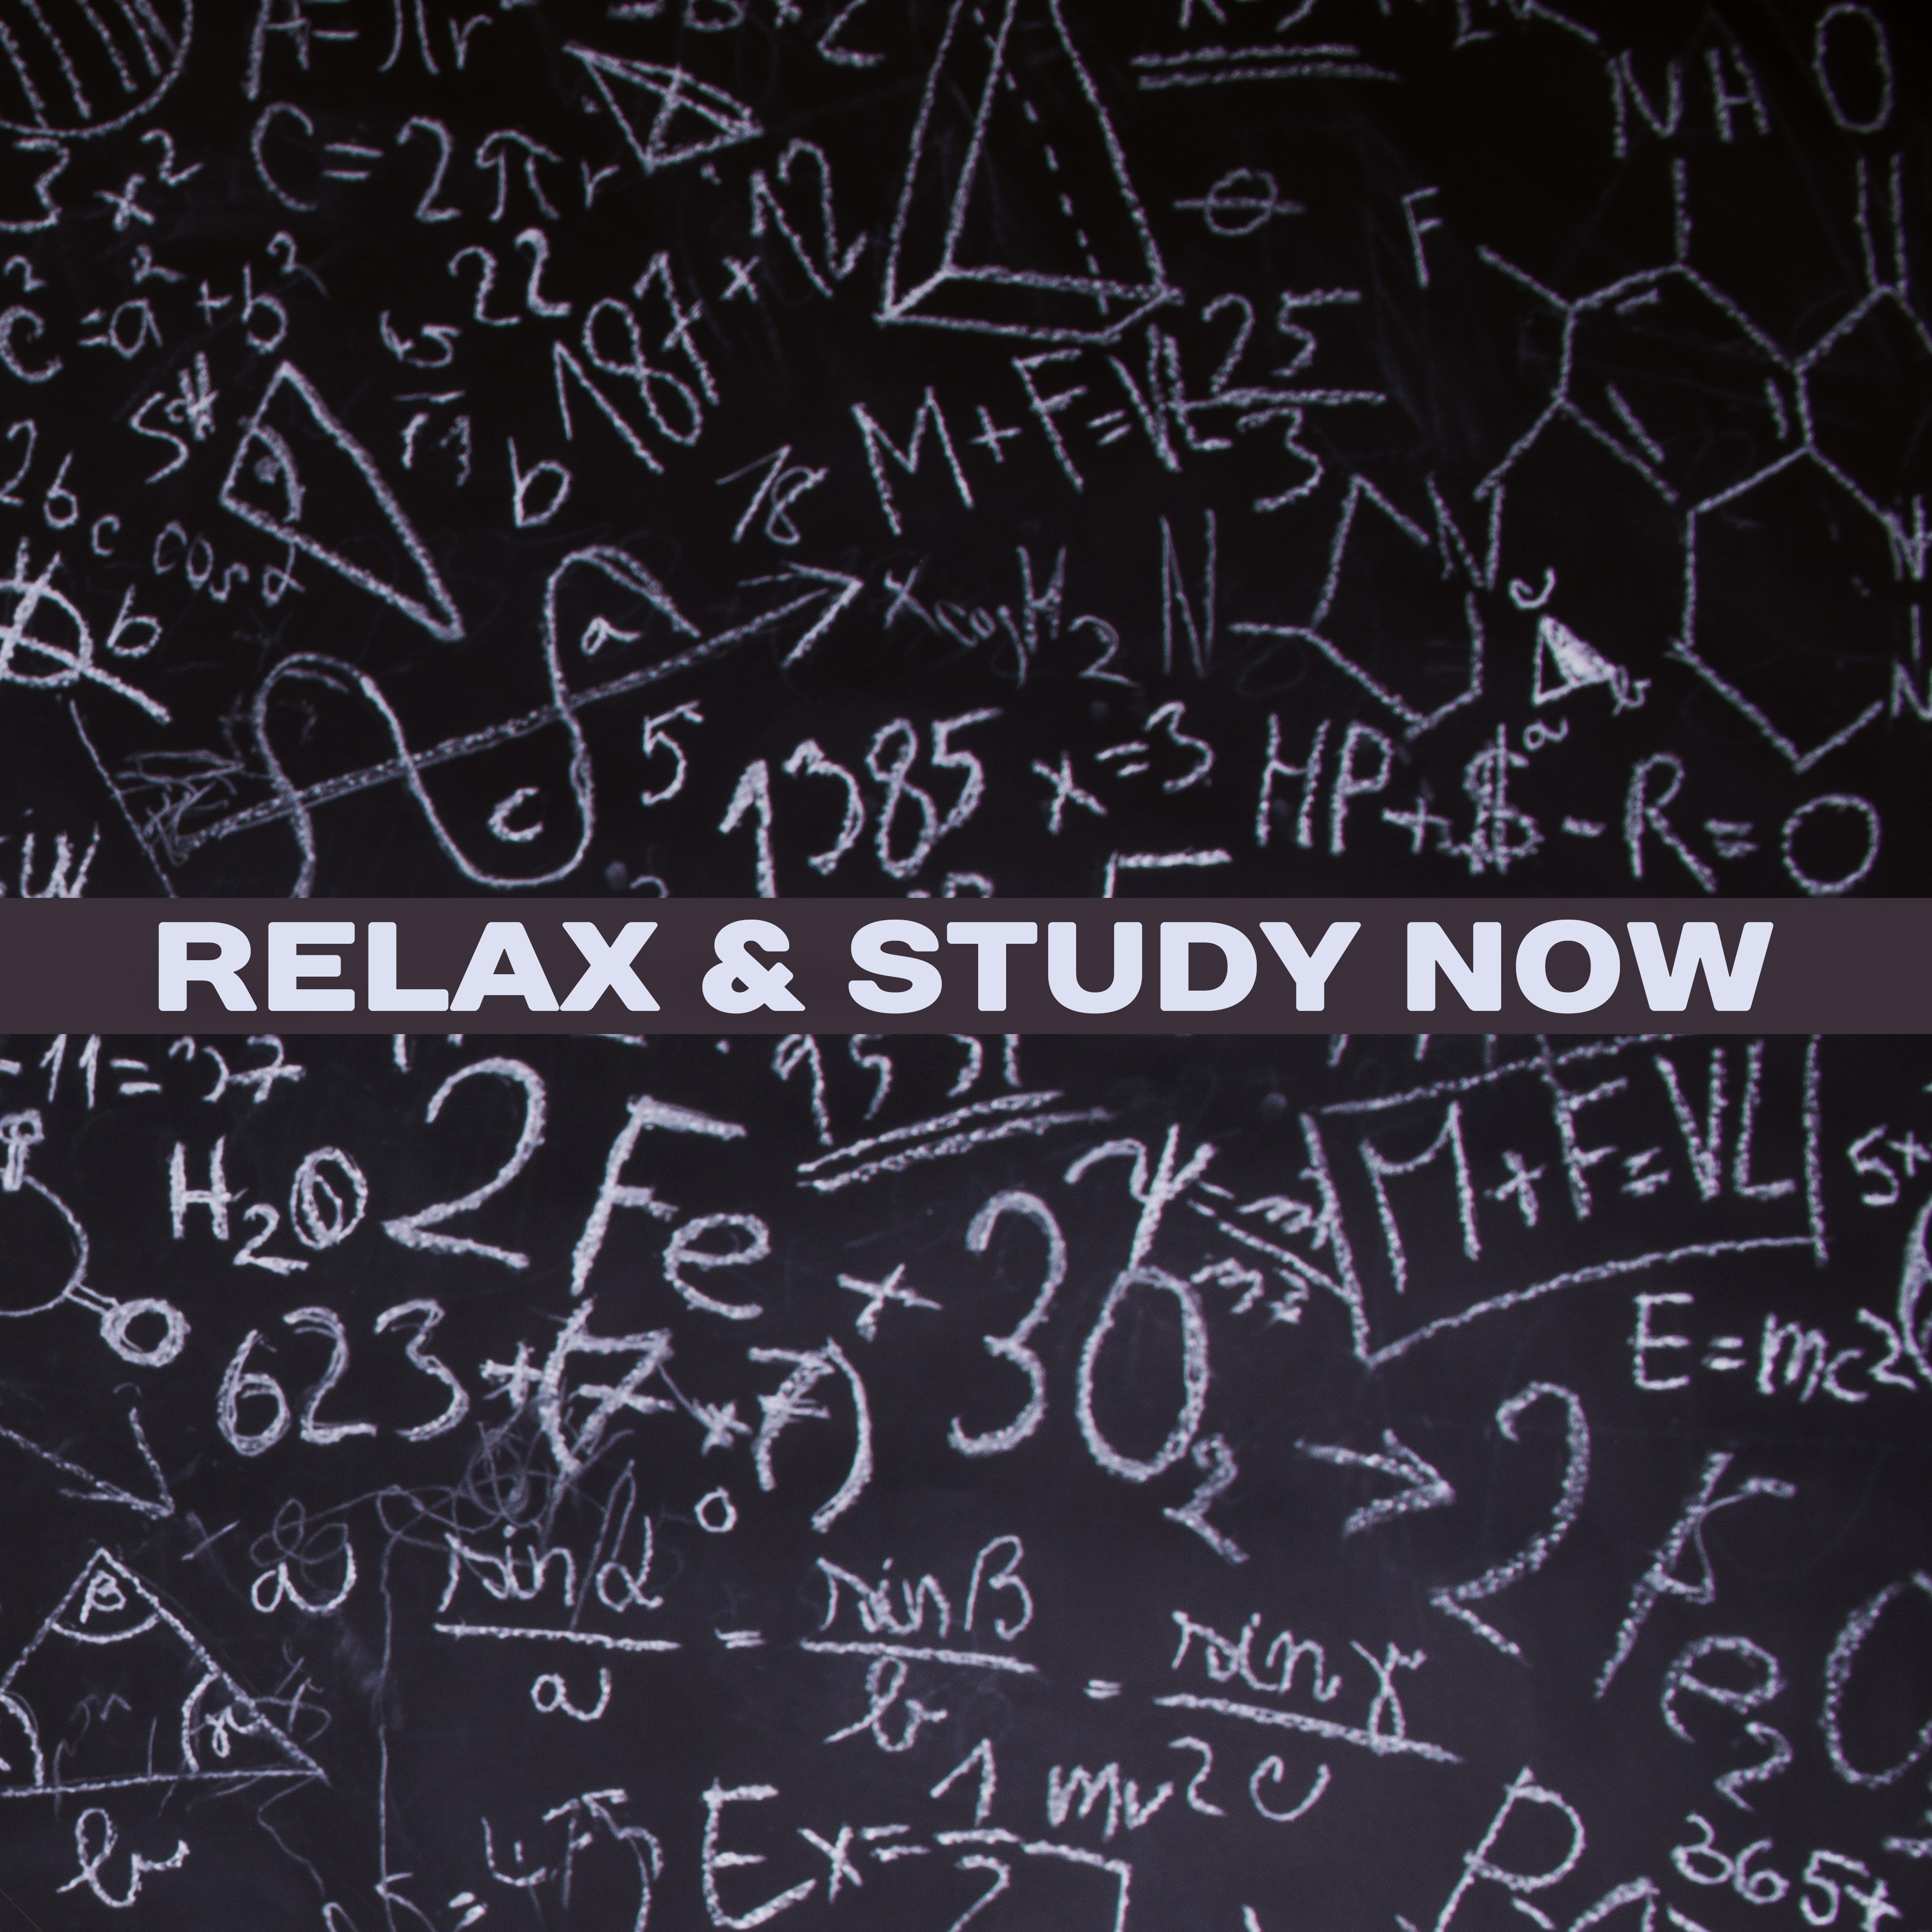 Relax & Study Now – Best Music for Learning, Ambient Classical Compilation, Keep Focus on the Task, Improve Memory